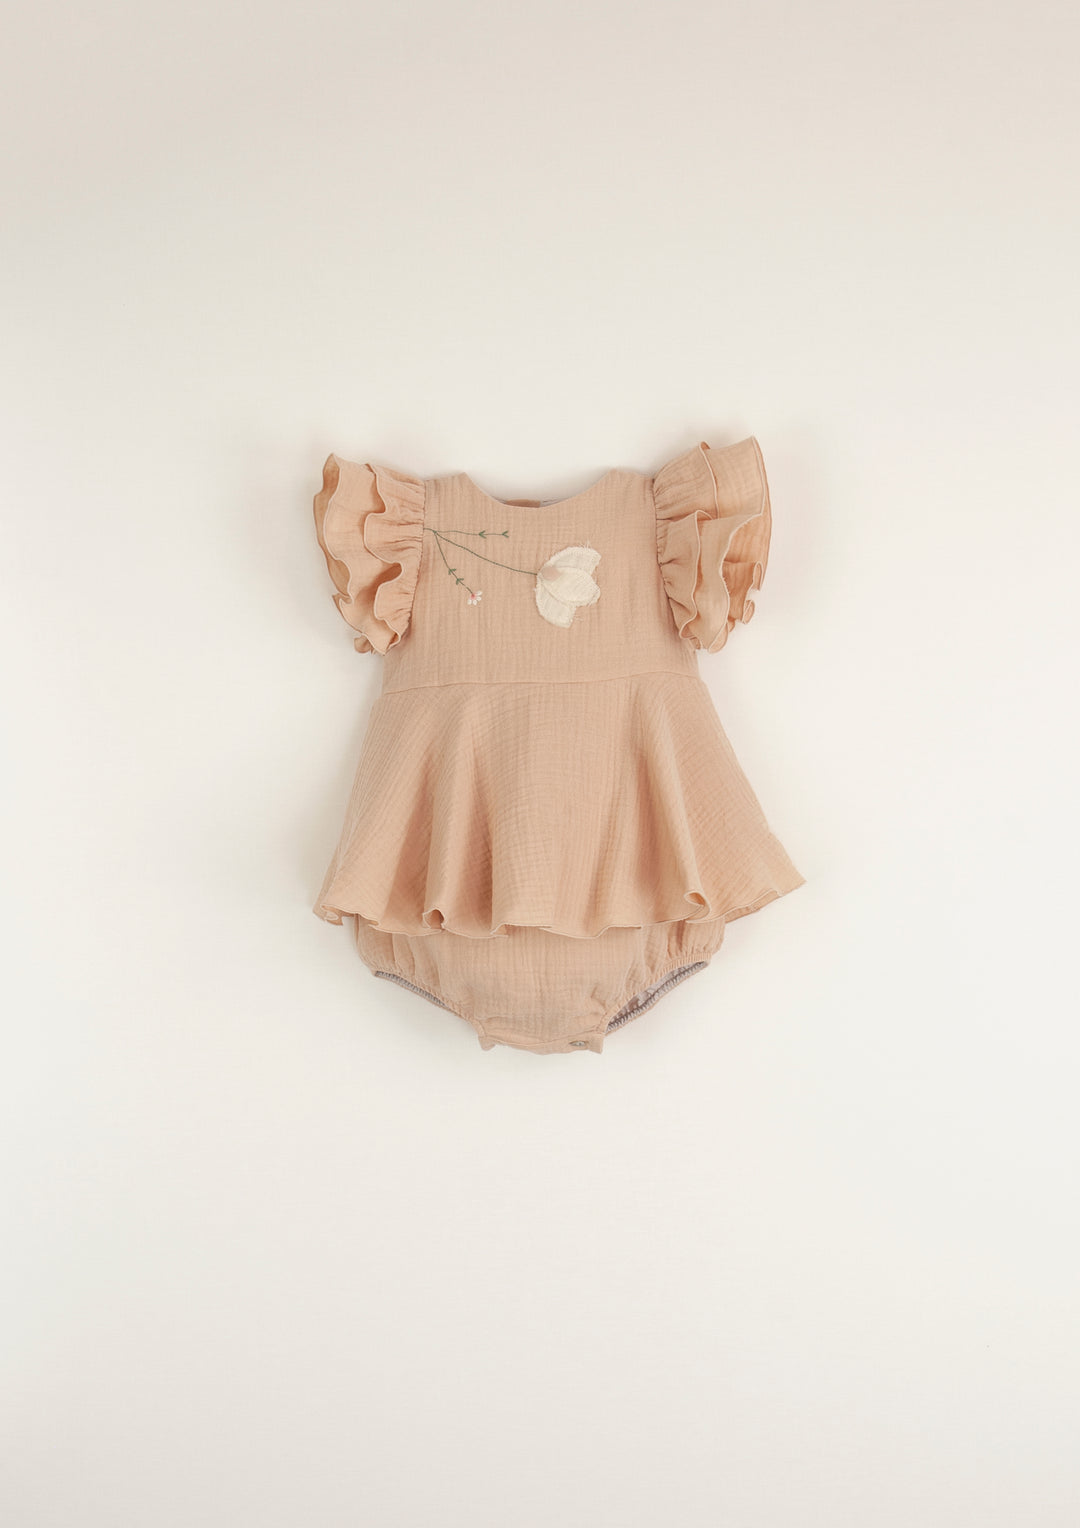 9.2 pINK romper suit w/ cape-style skirt